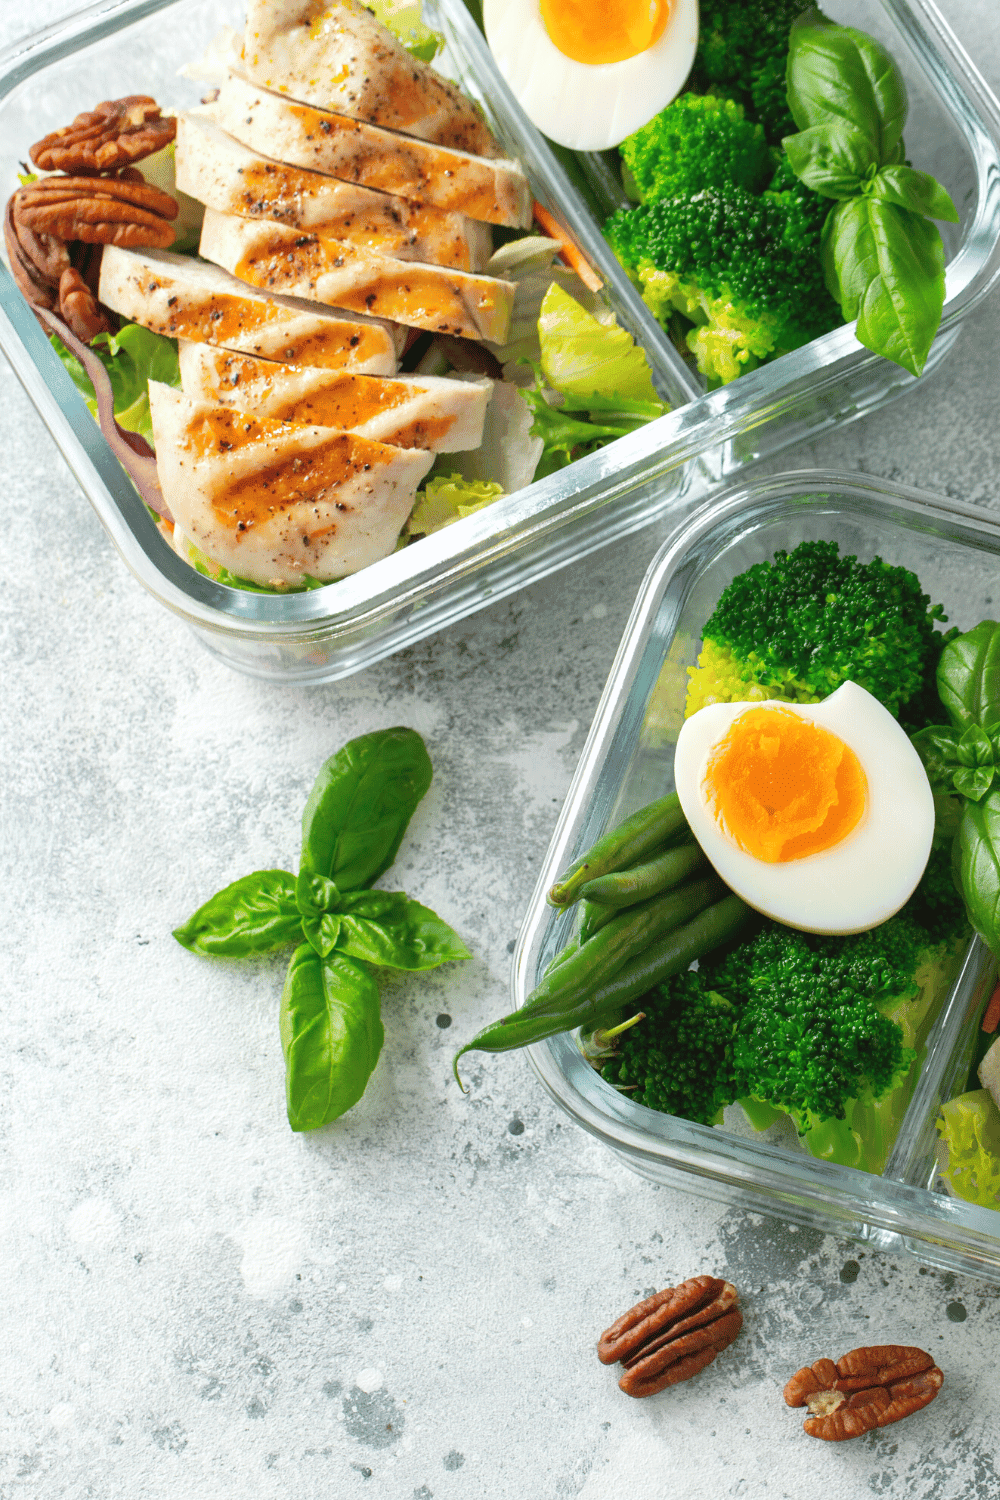 7 Day Low-Budget and Low-Carbohydrate Meal Plan